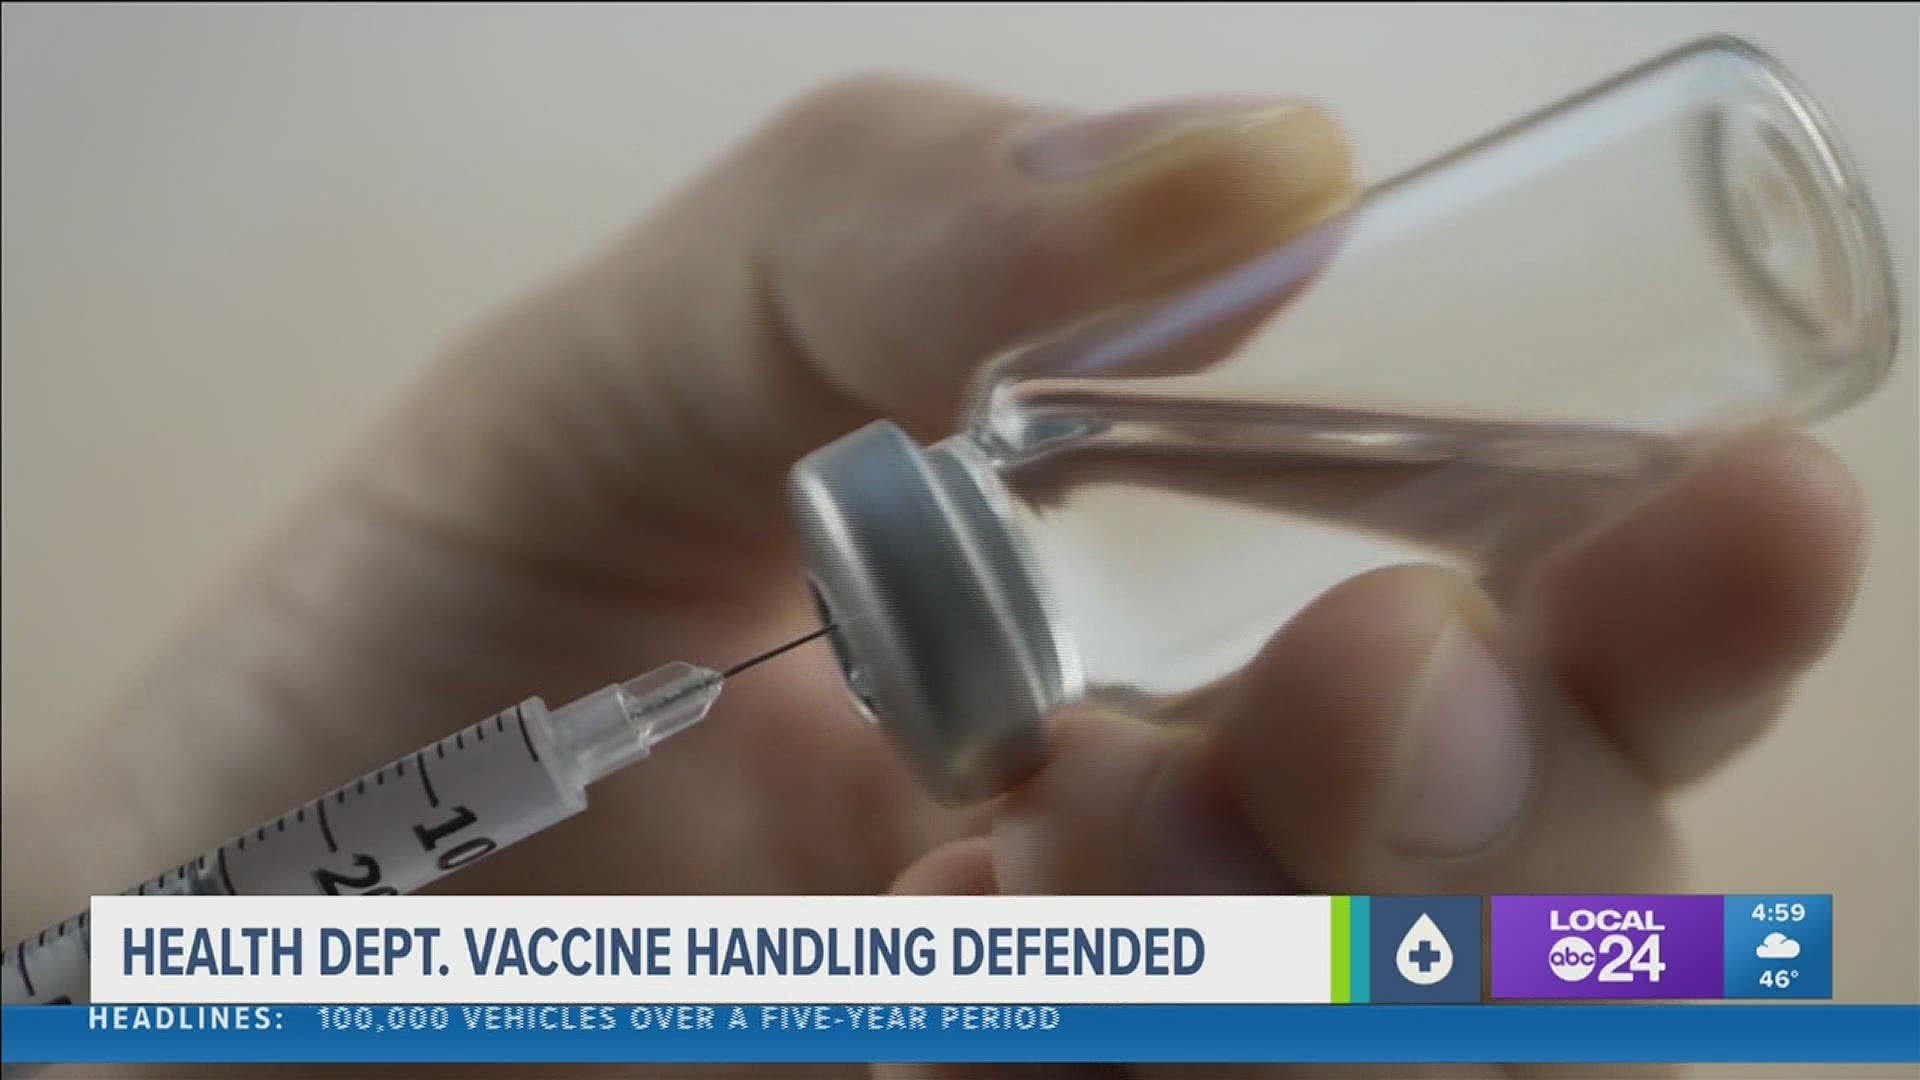 The latest comes amid an investigation into mishandling of the COVID-19 vaccination distribution in the county.